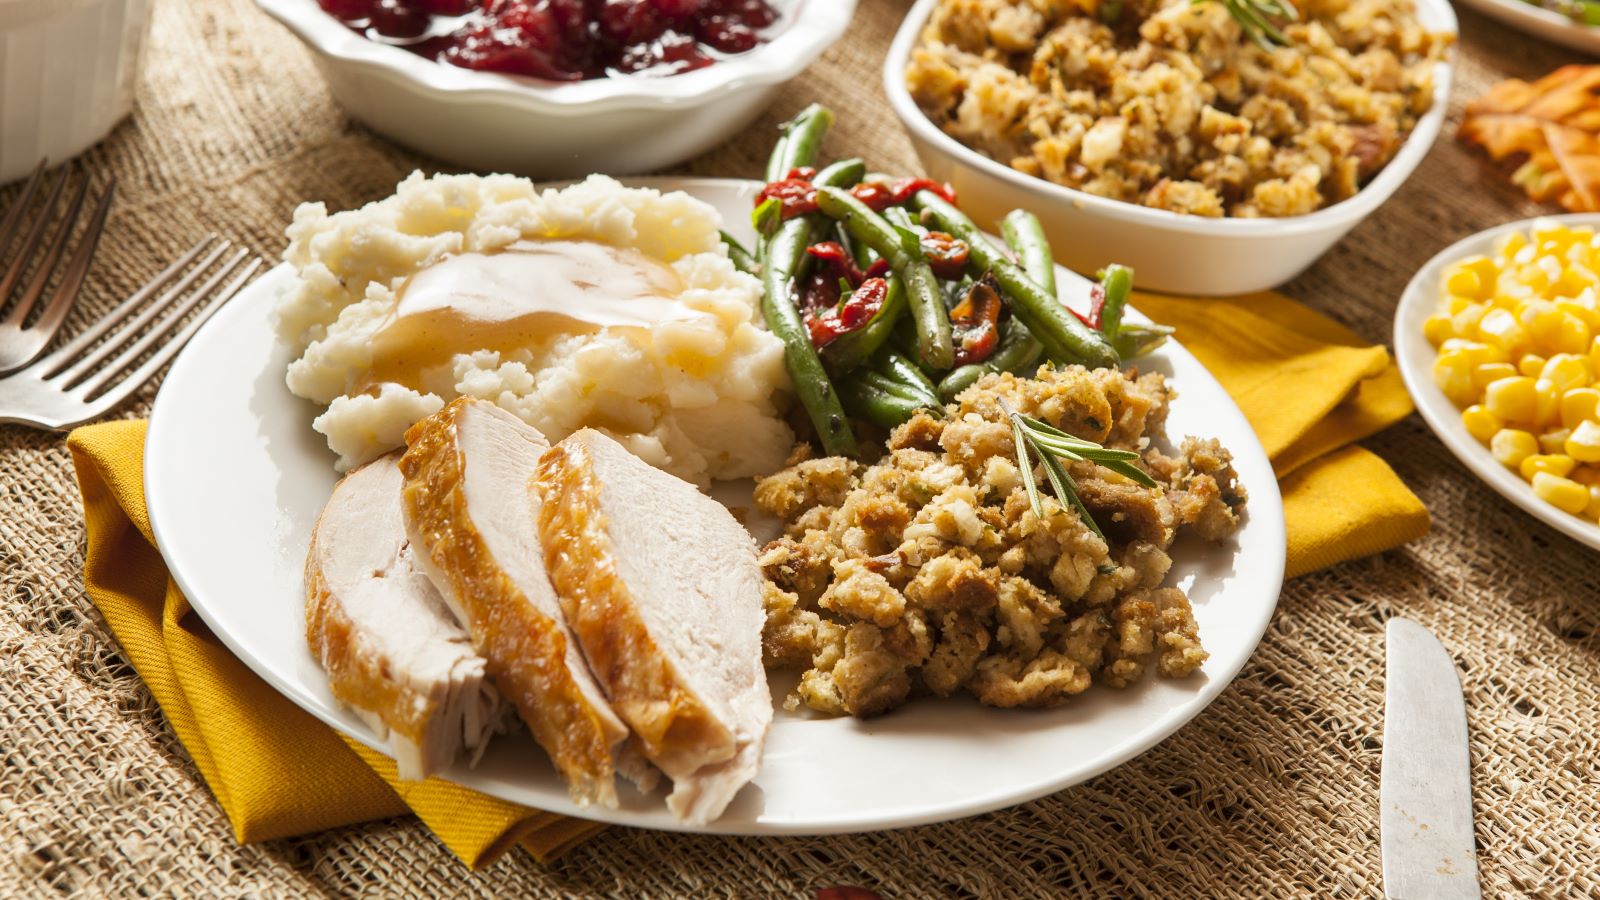 5 Unhealthy Meals to Look Out for This Thanksgiving | Hartford Hospital